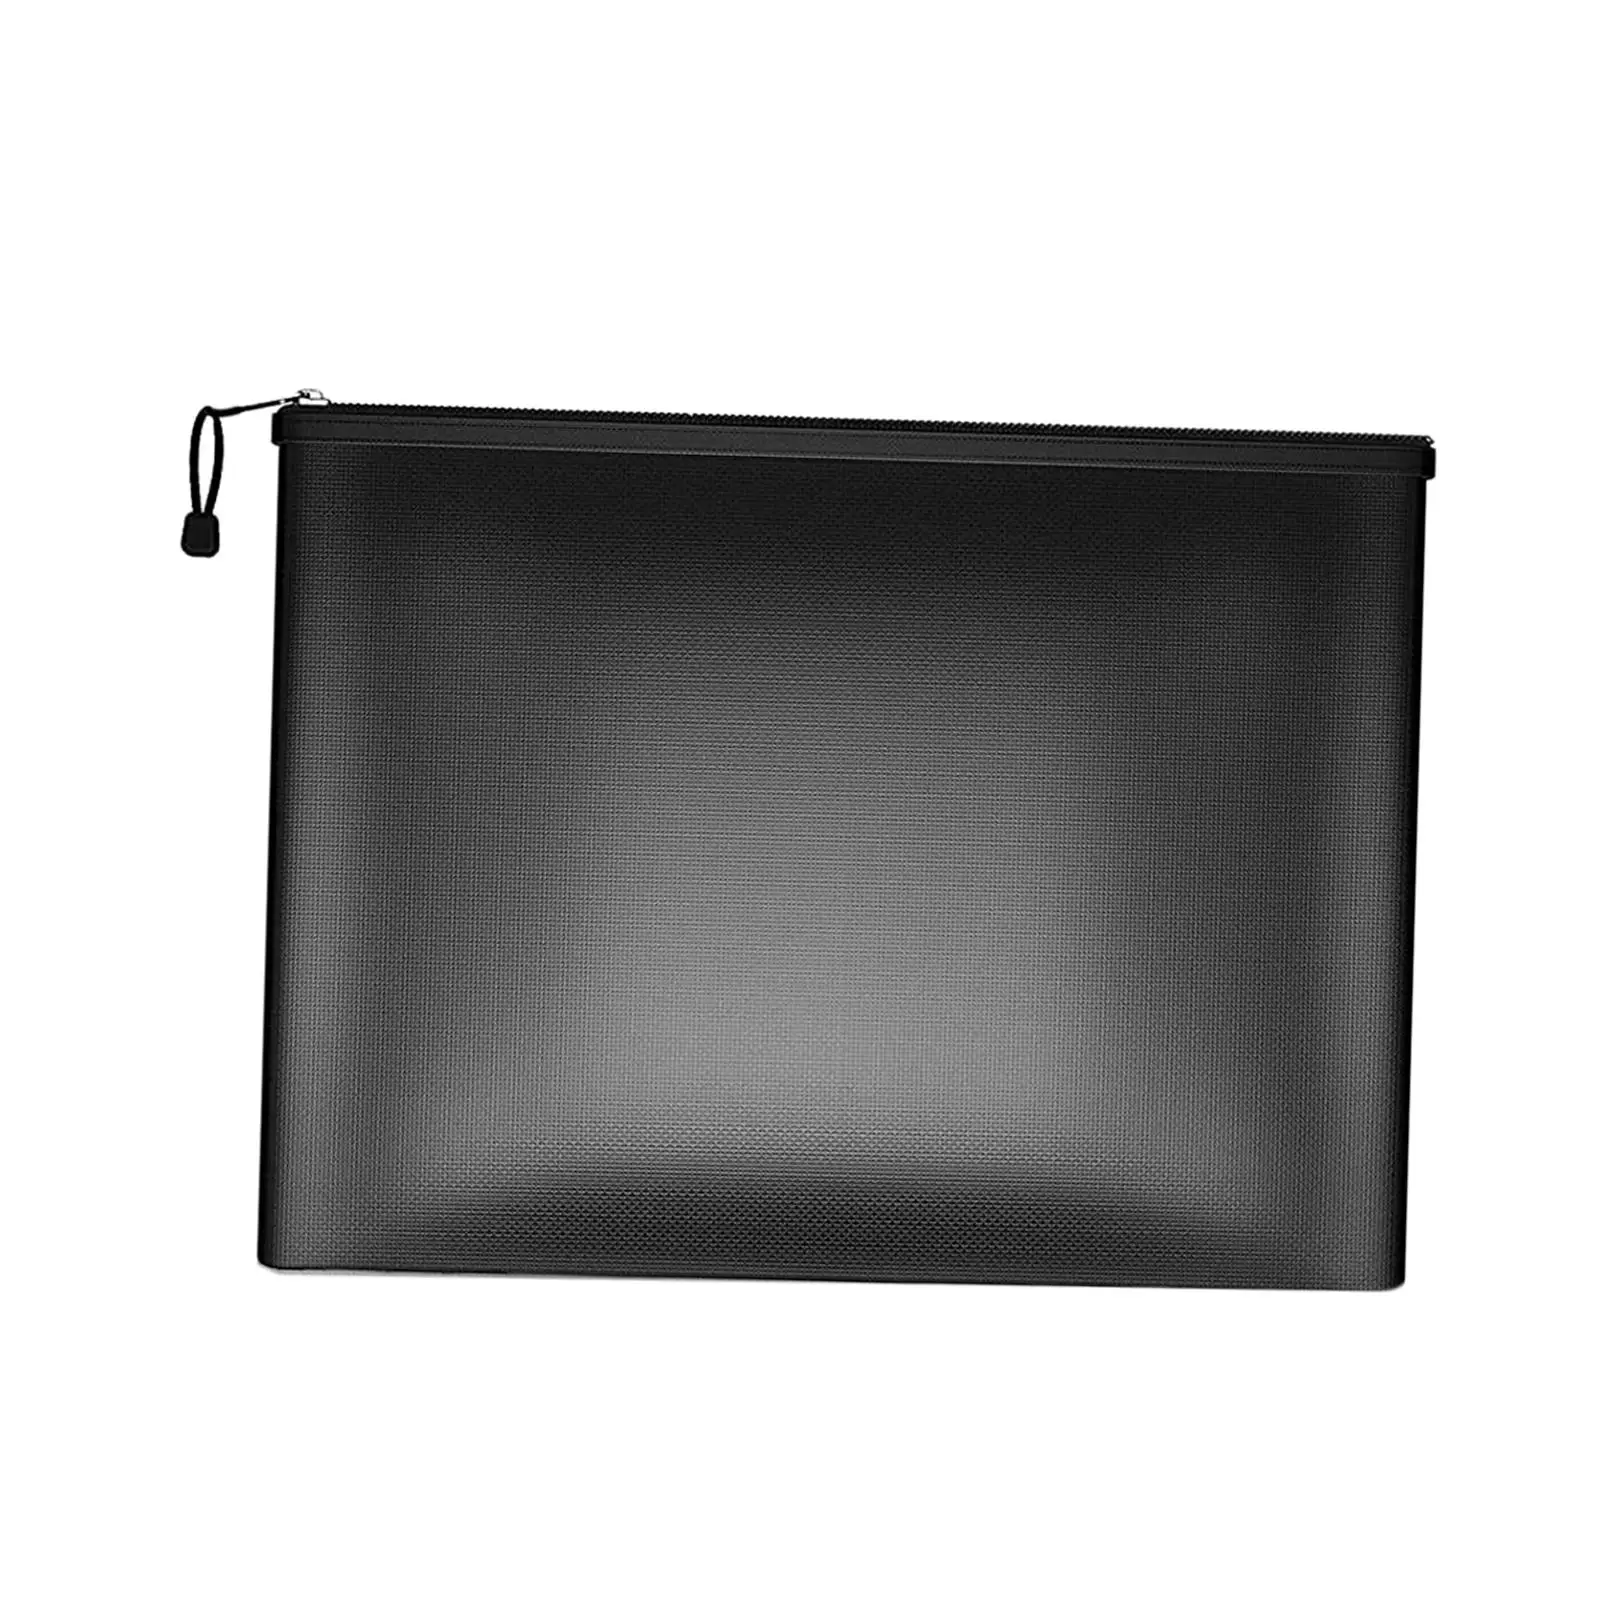 Fireproof money pouch with Zipper Waterproof Safety Folder for Photo Passports